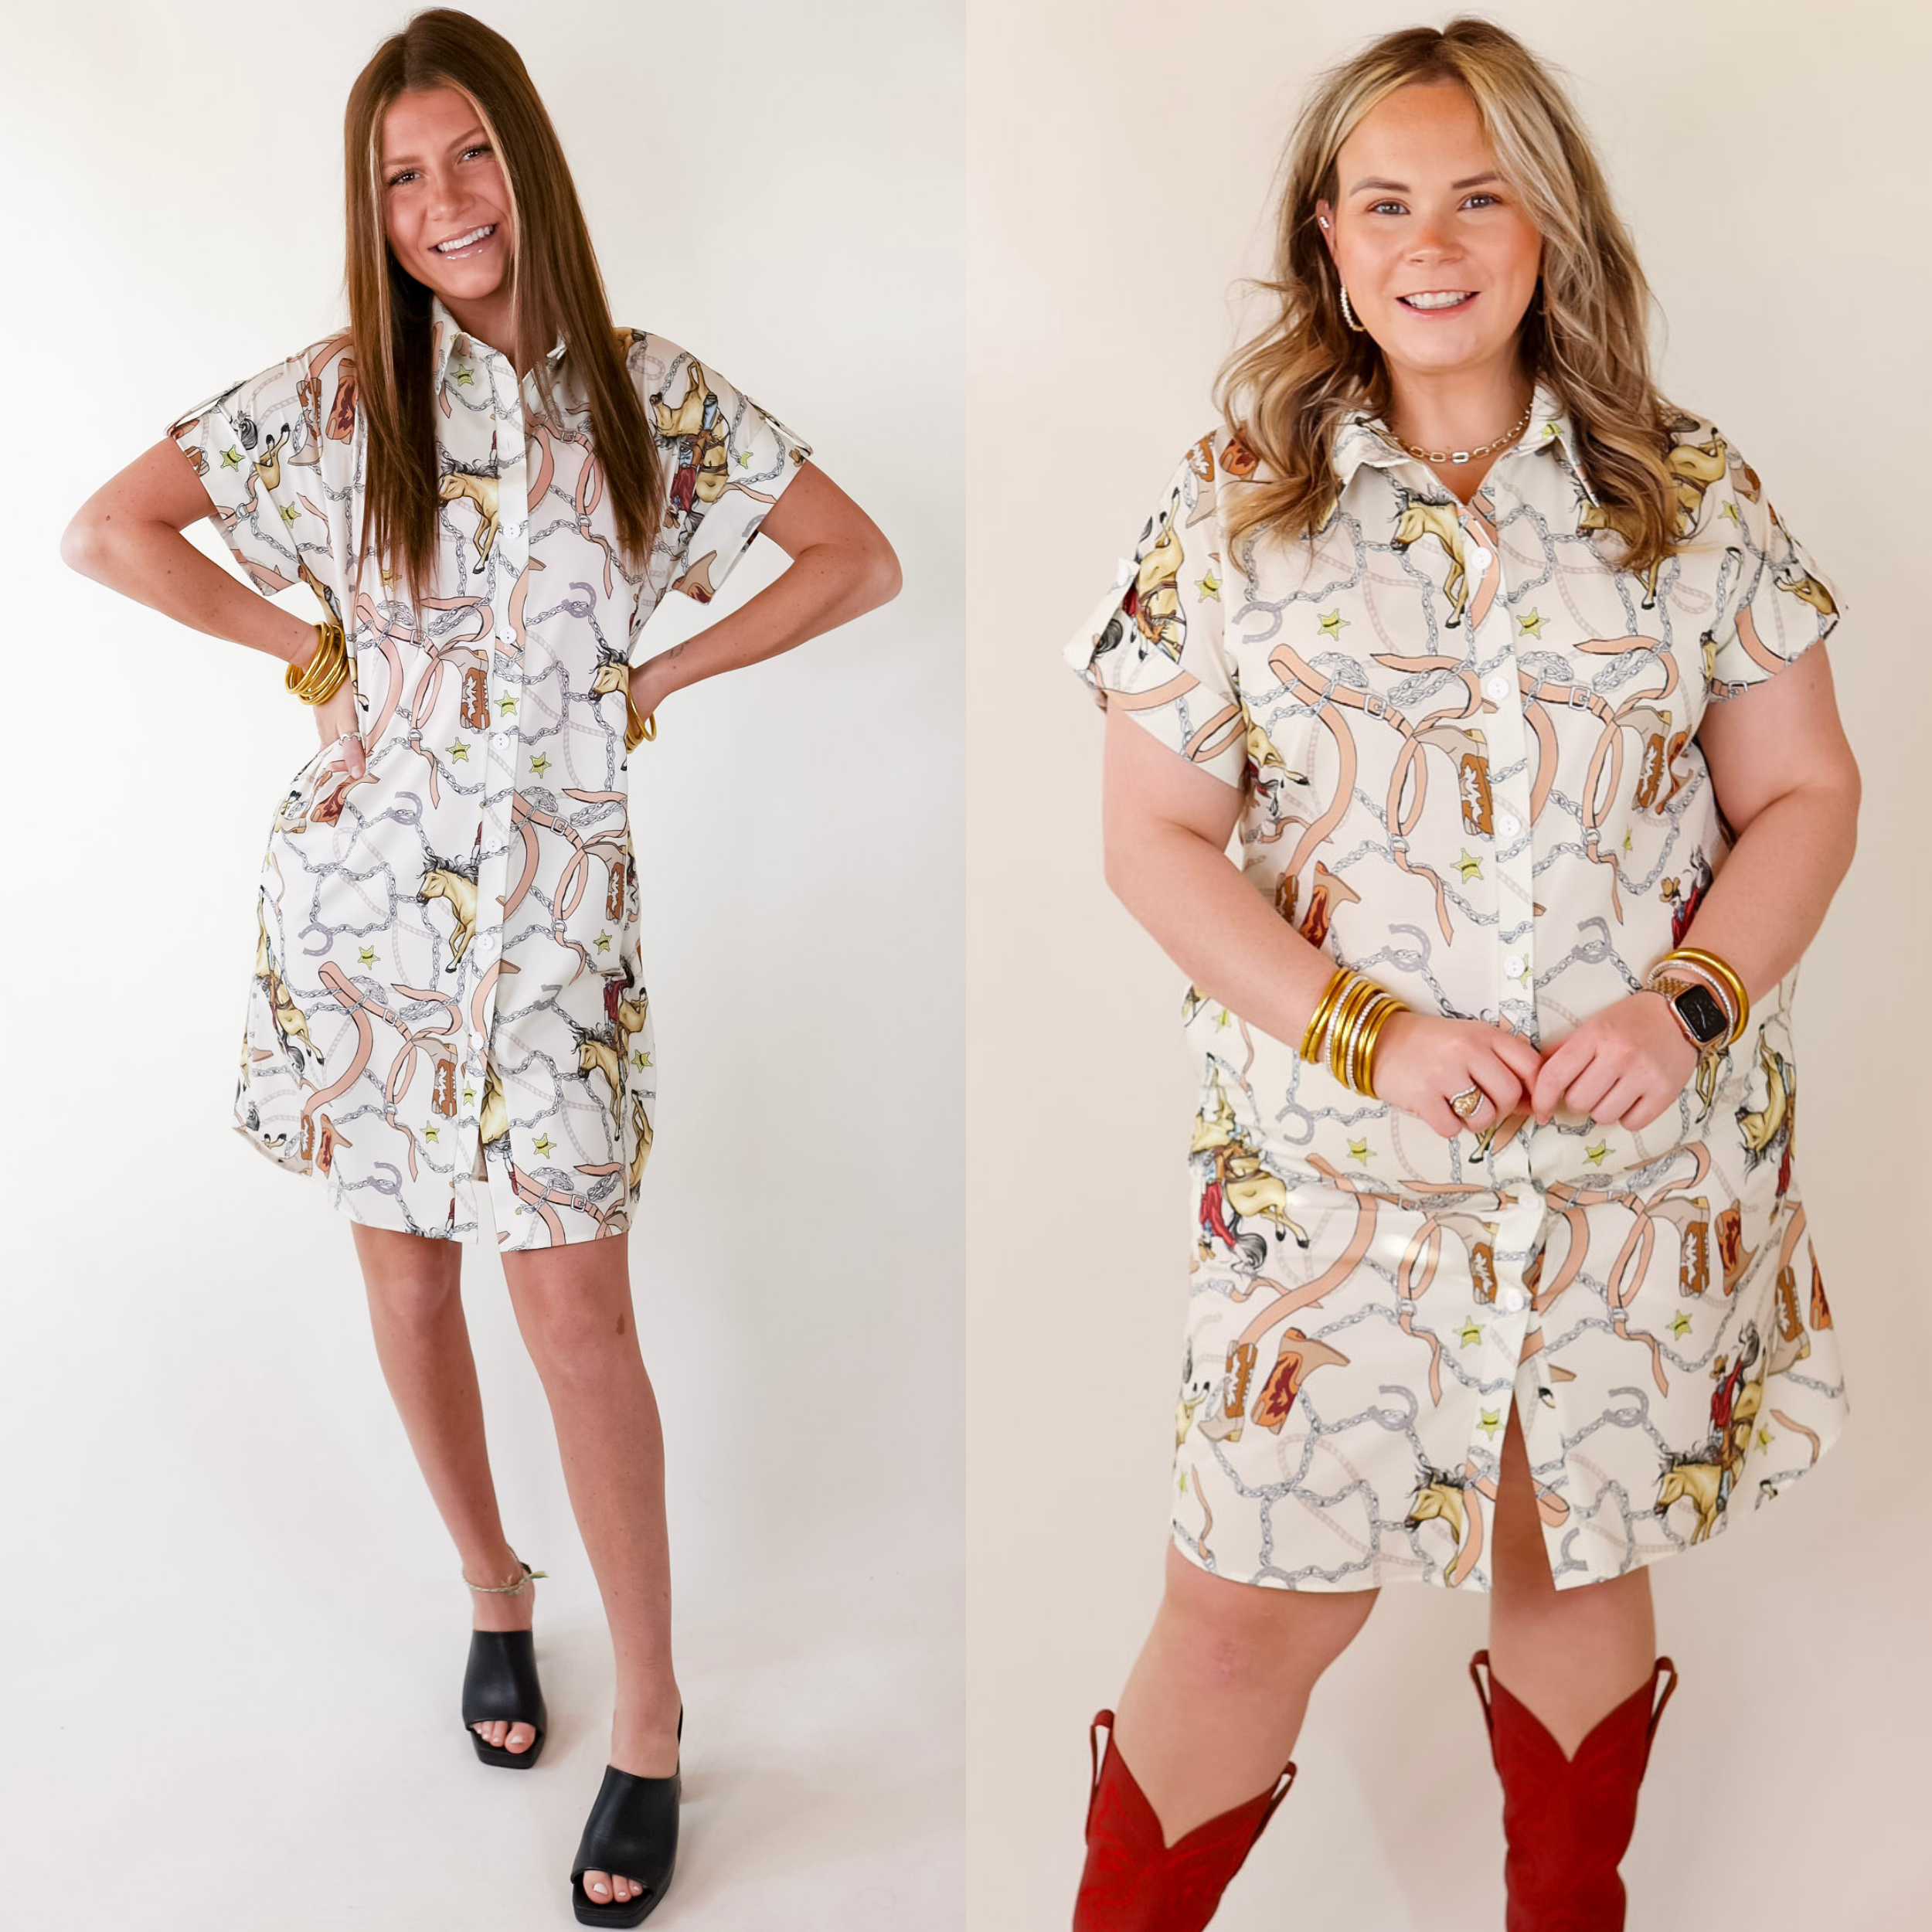 Models are wearing a collared button up dress featuring a cowboy print consisting of cowboy boots, sheriff badges, belts, boots, and horses